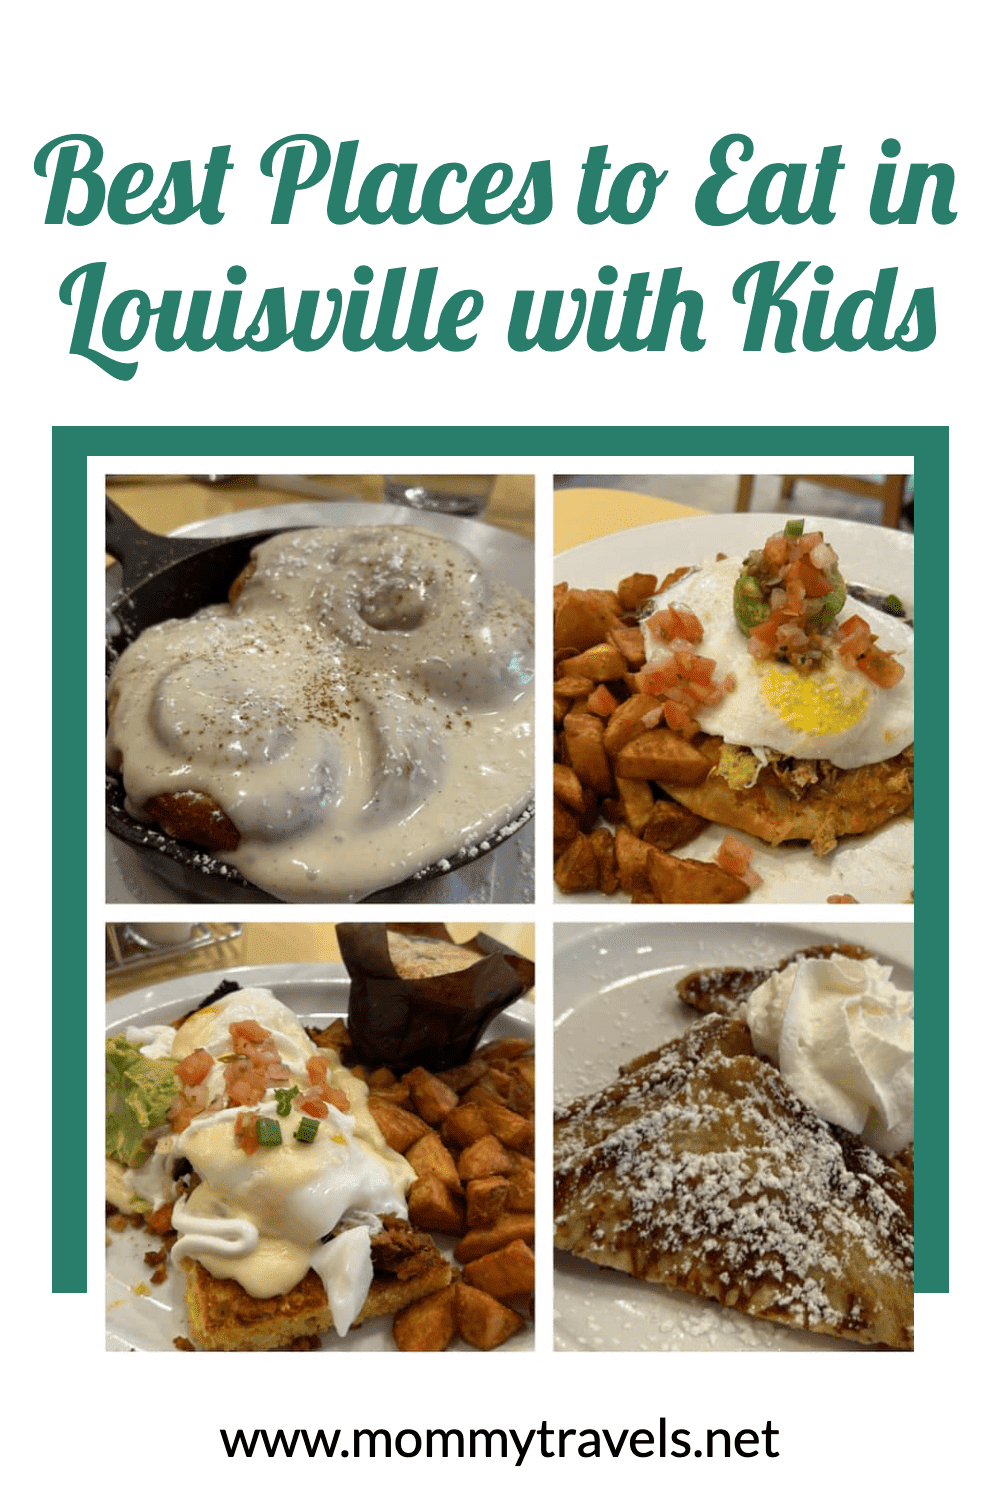 best-places-to-eat-in-louisville-with-kids